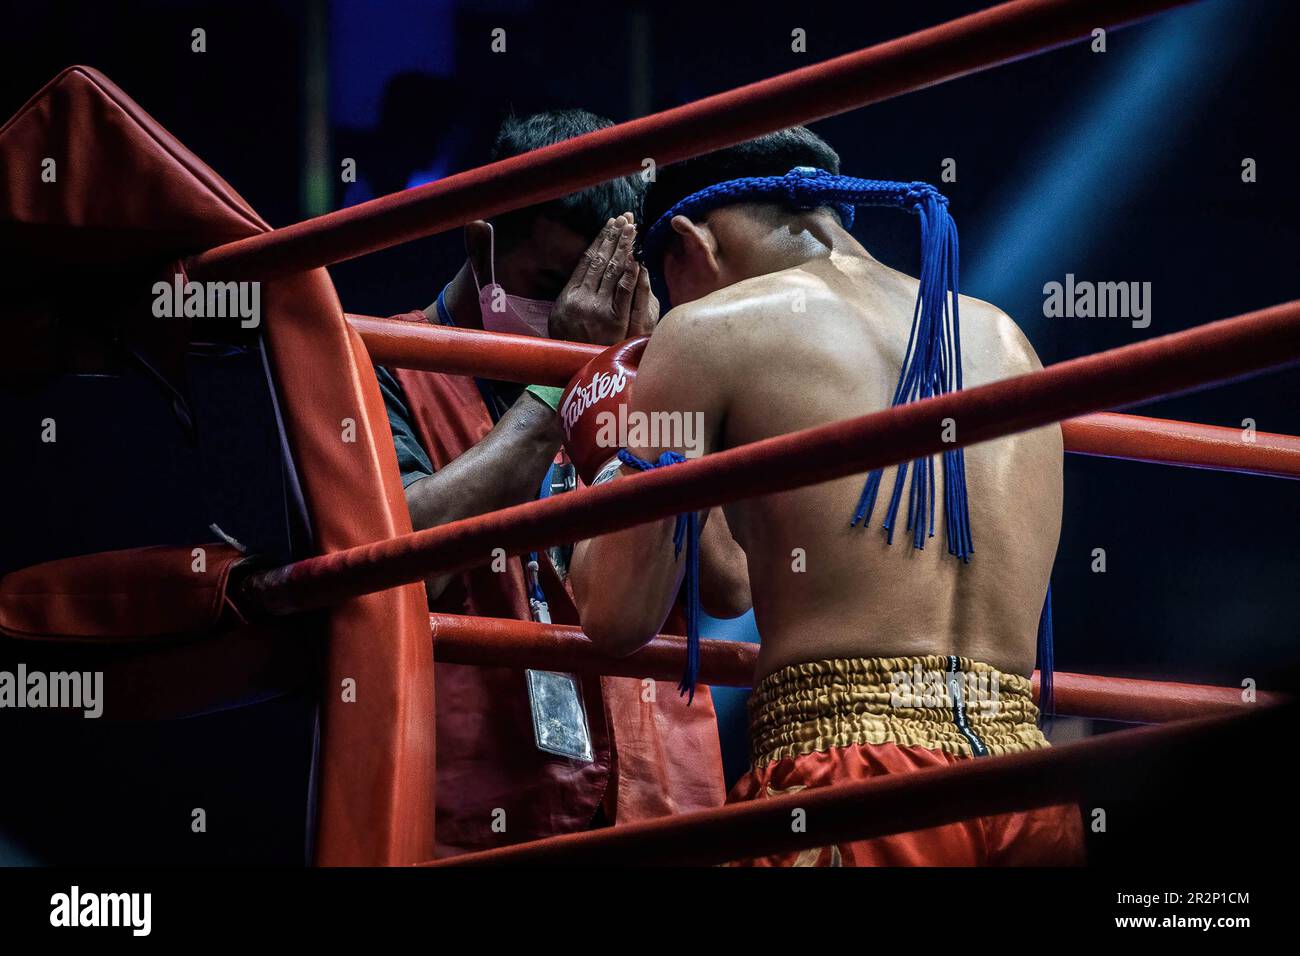 A Muay Thai boxer performs 'Wai Kru' a ritual ceremony before engaging in battle which is a thank you and blessing to show deep respect to one's coaches, training partners, and family, at Bangkok's Rajadamnern stadium. Muay Thai fights at Thailand’s iconic boxing Rajadamnern stadium, the dream stage for competitors and it is favourite for combat sports all over the world. Stock Photo